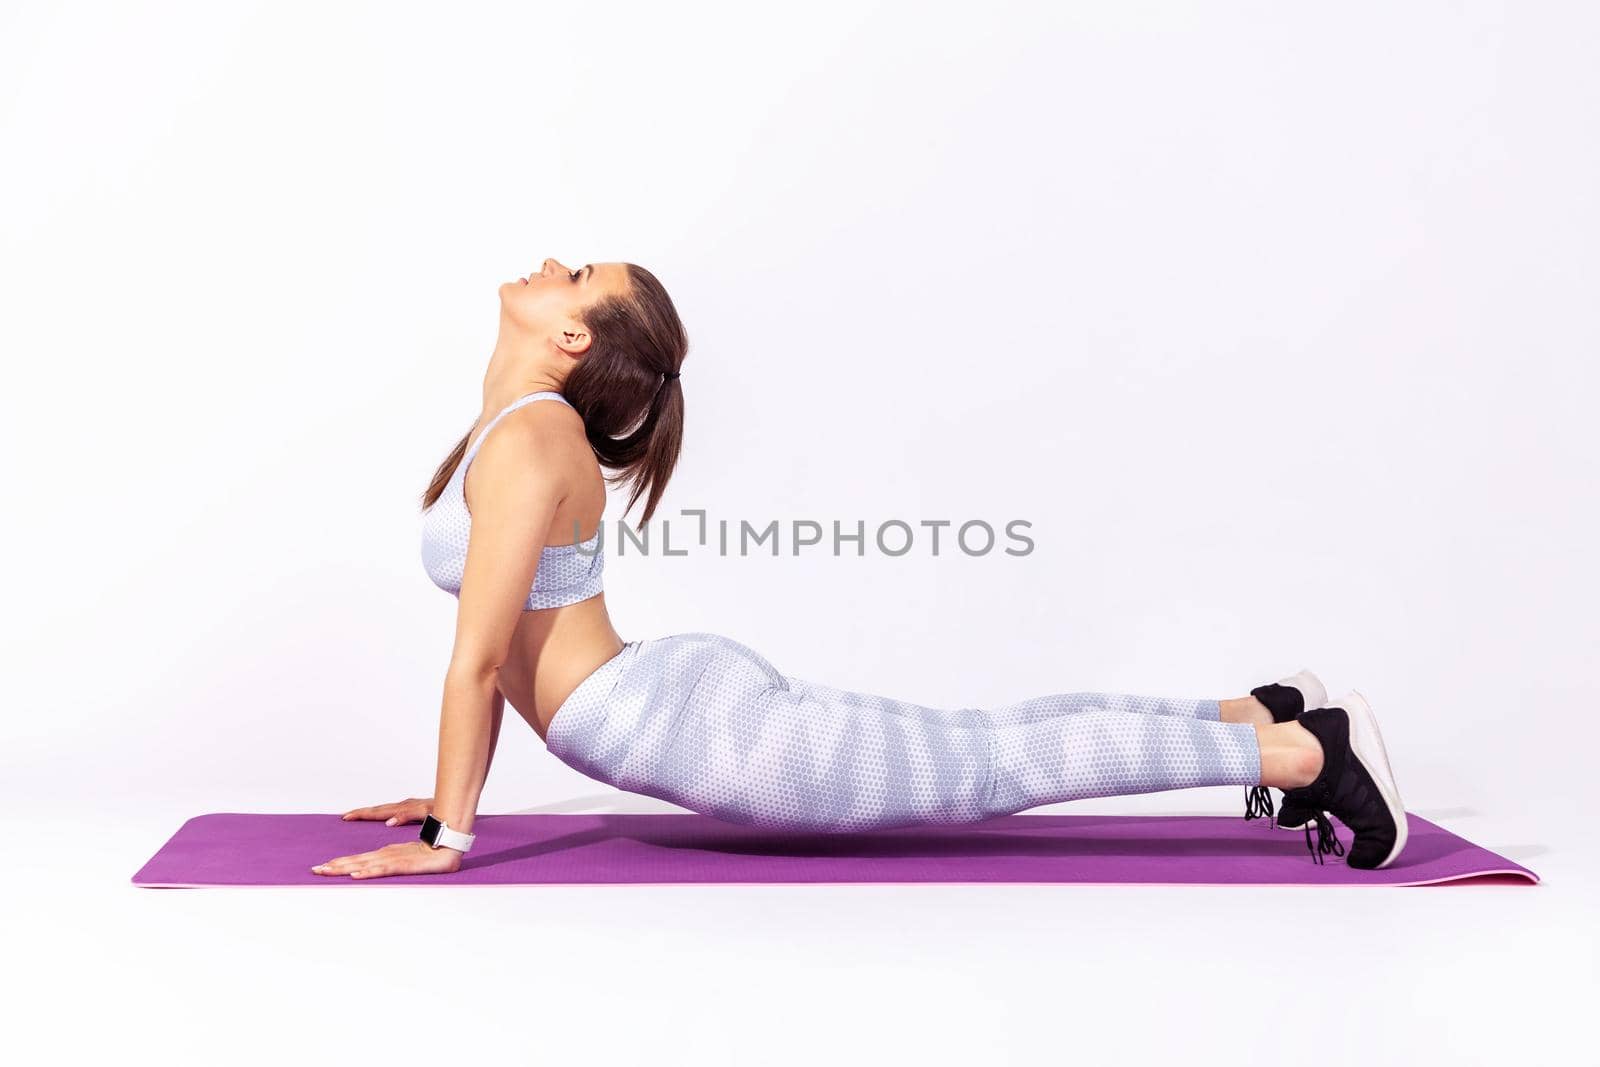 Full length athletic woman in white sportswear doing cobra pose, practicing bhujangasana in yoga, stretching back muscles for better flexibility. Indoor studio shot isolated on gray background